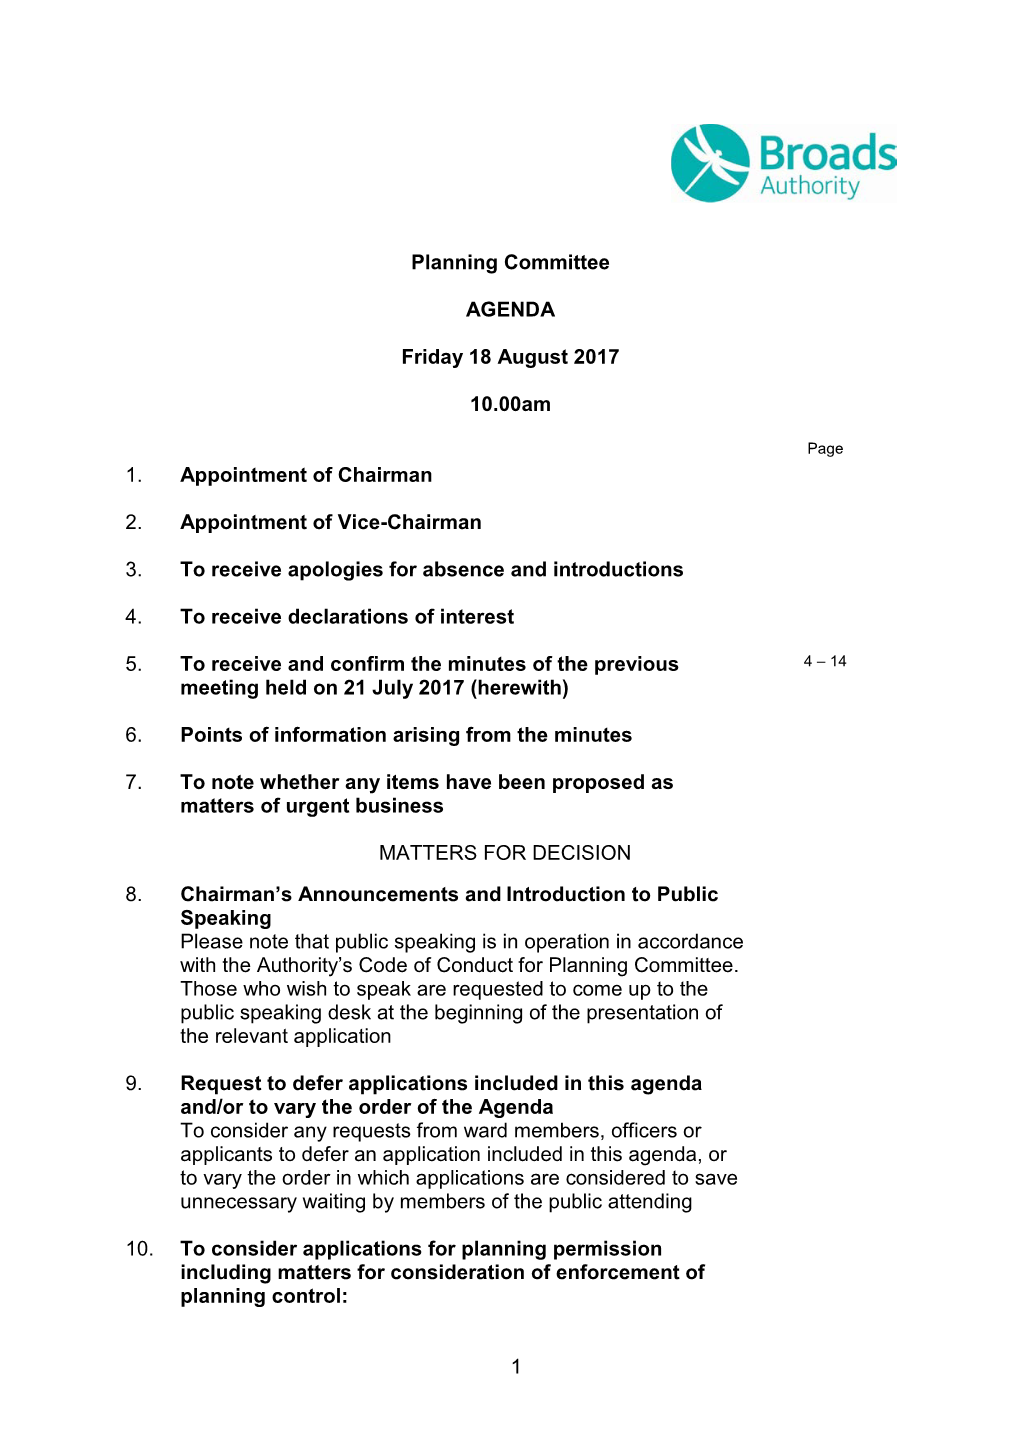 Planning Committee AGENDA Friday 18 August 2017 10.00Am 1